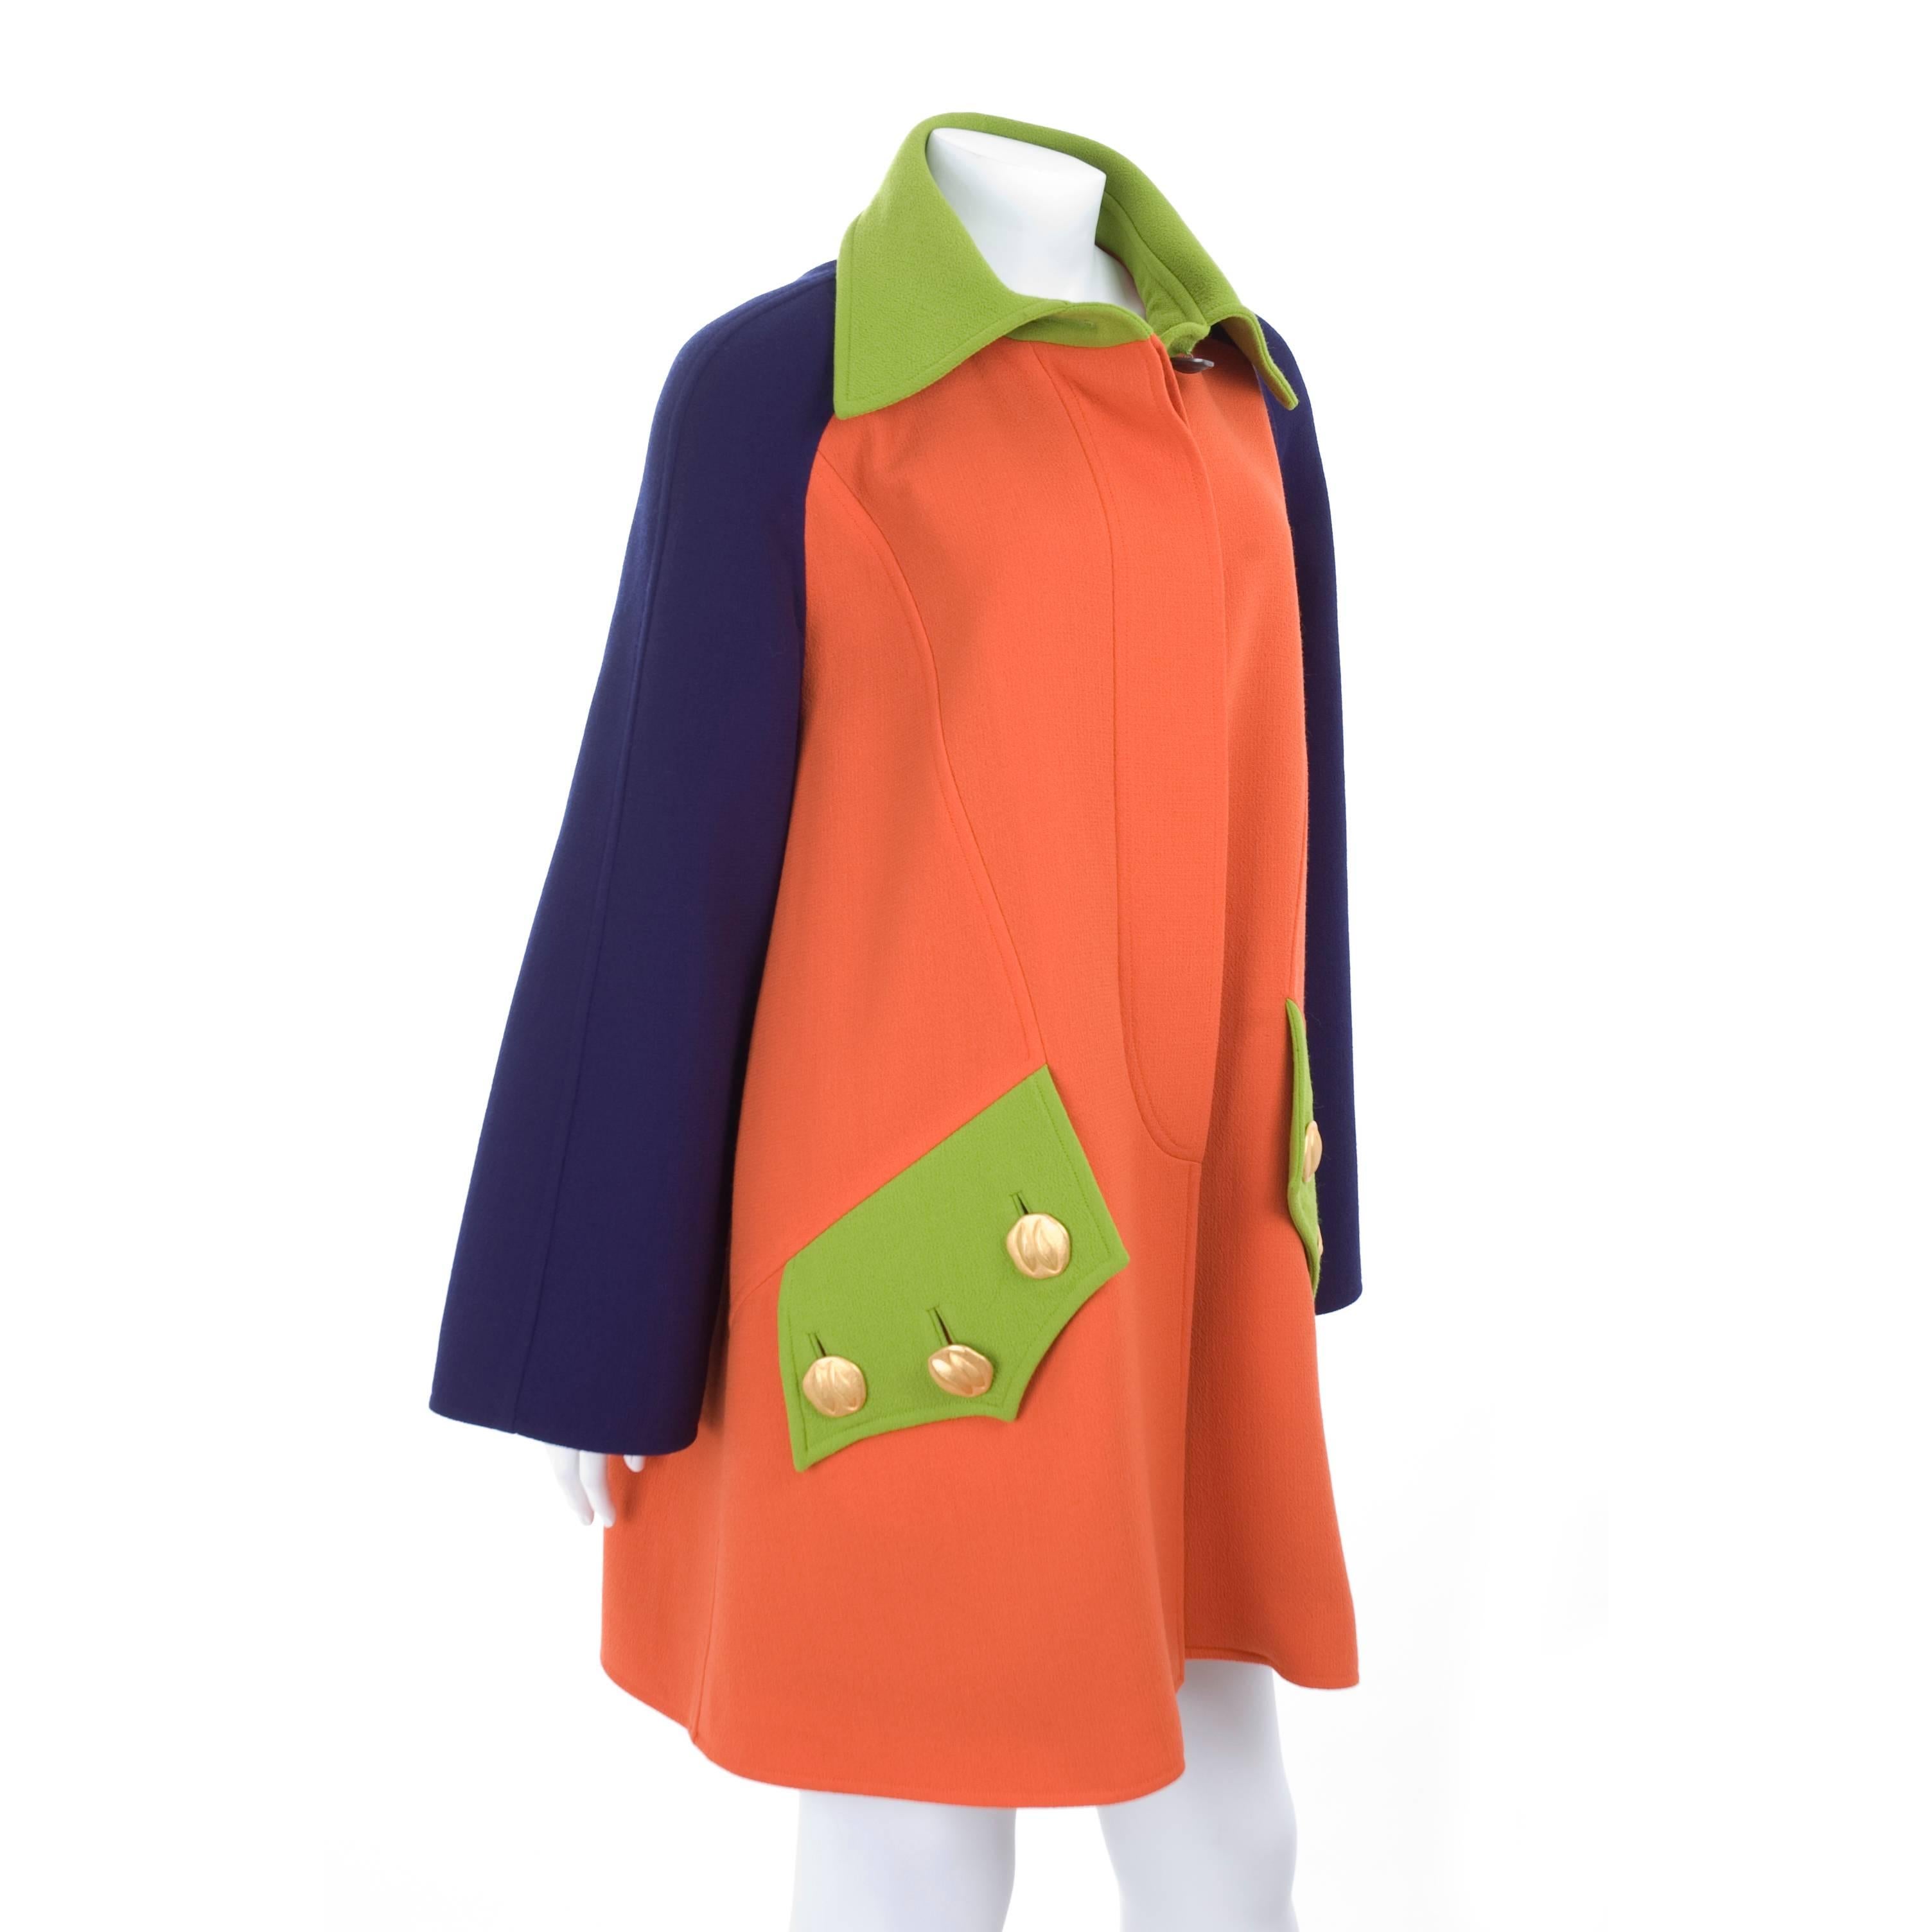 90's Christian Lacroix color block coat in orange, blue & green, Beautiful wool fabric and lining in black with white dots.
Size label is missing about 44 Fr or 12 US
Excellent condition - no flaws to mention.
Measurements:
Length 33.5 - bust 50